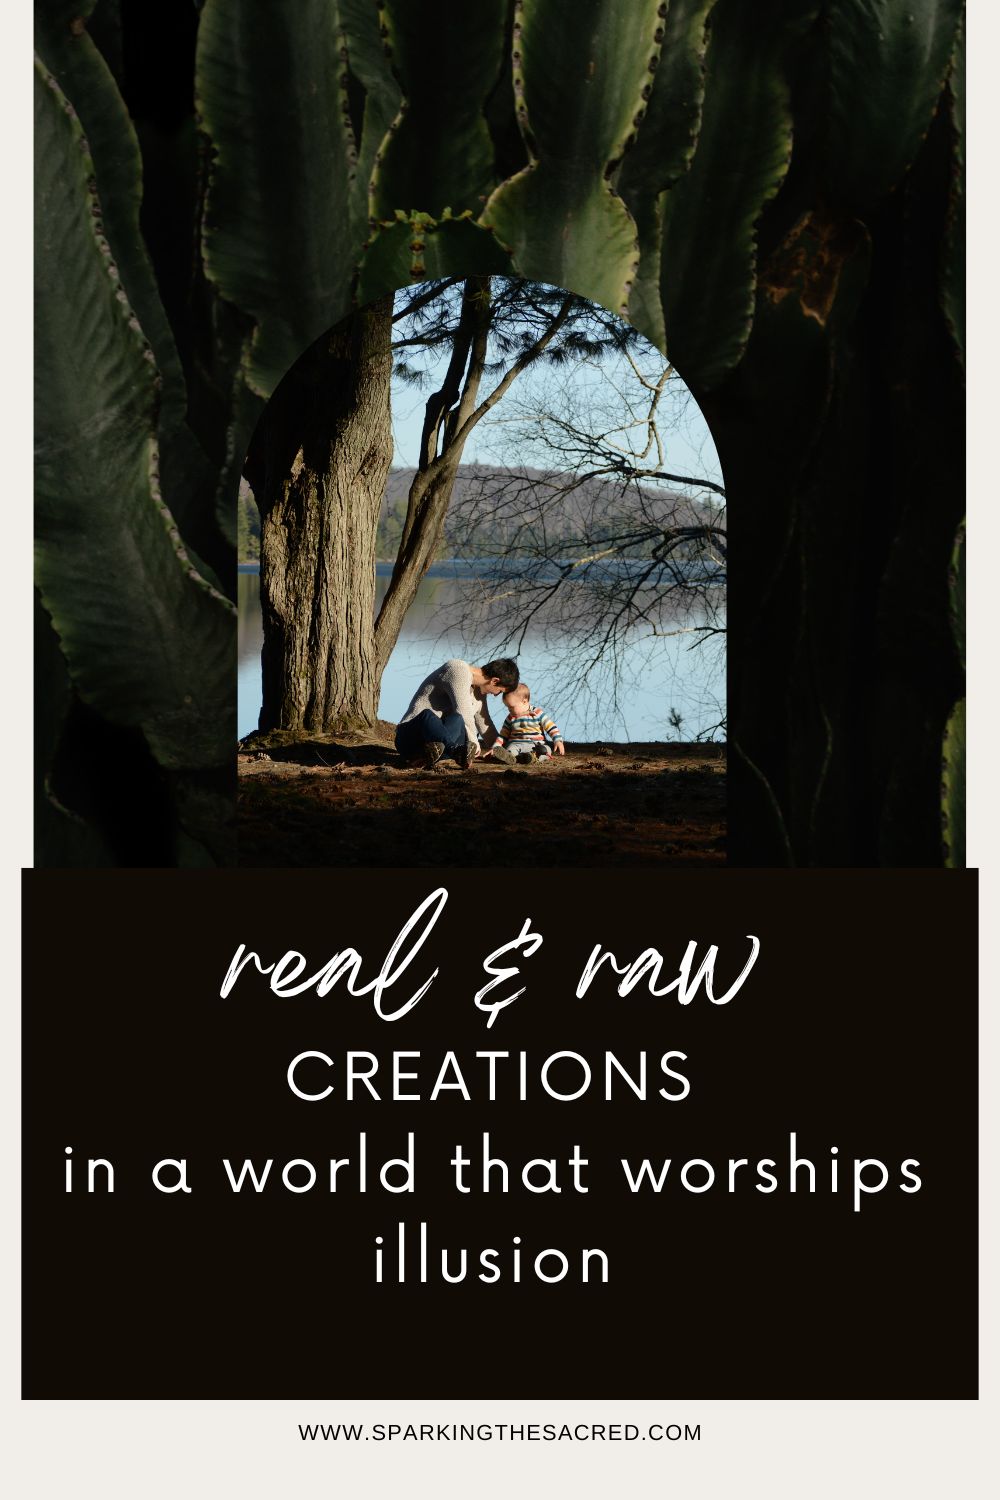 Real & Raw Creations in world that worships illusion